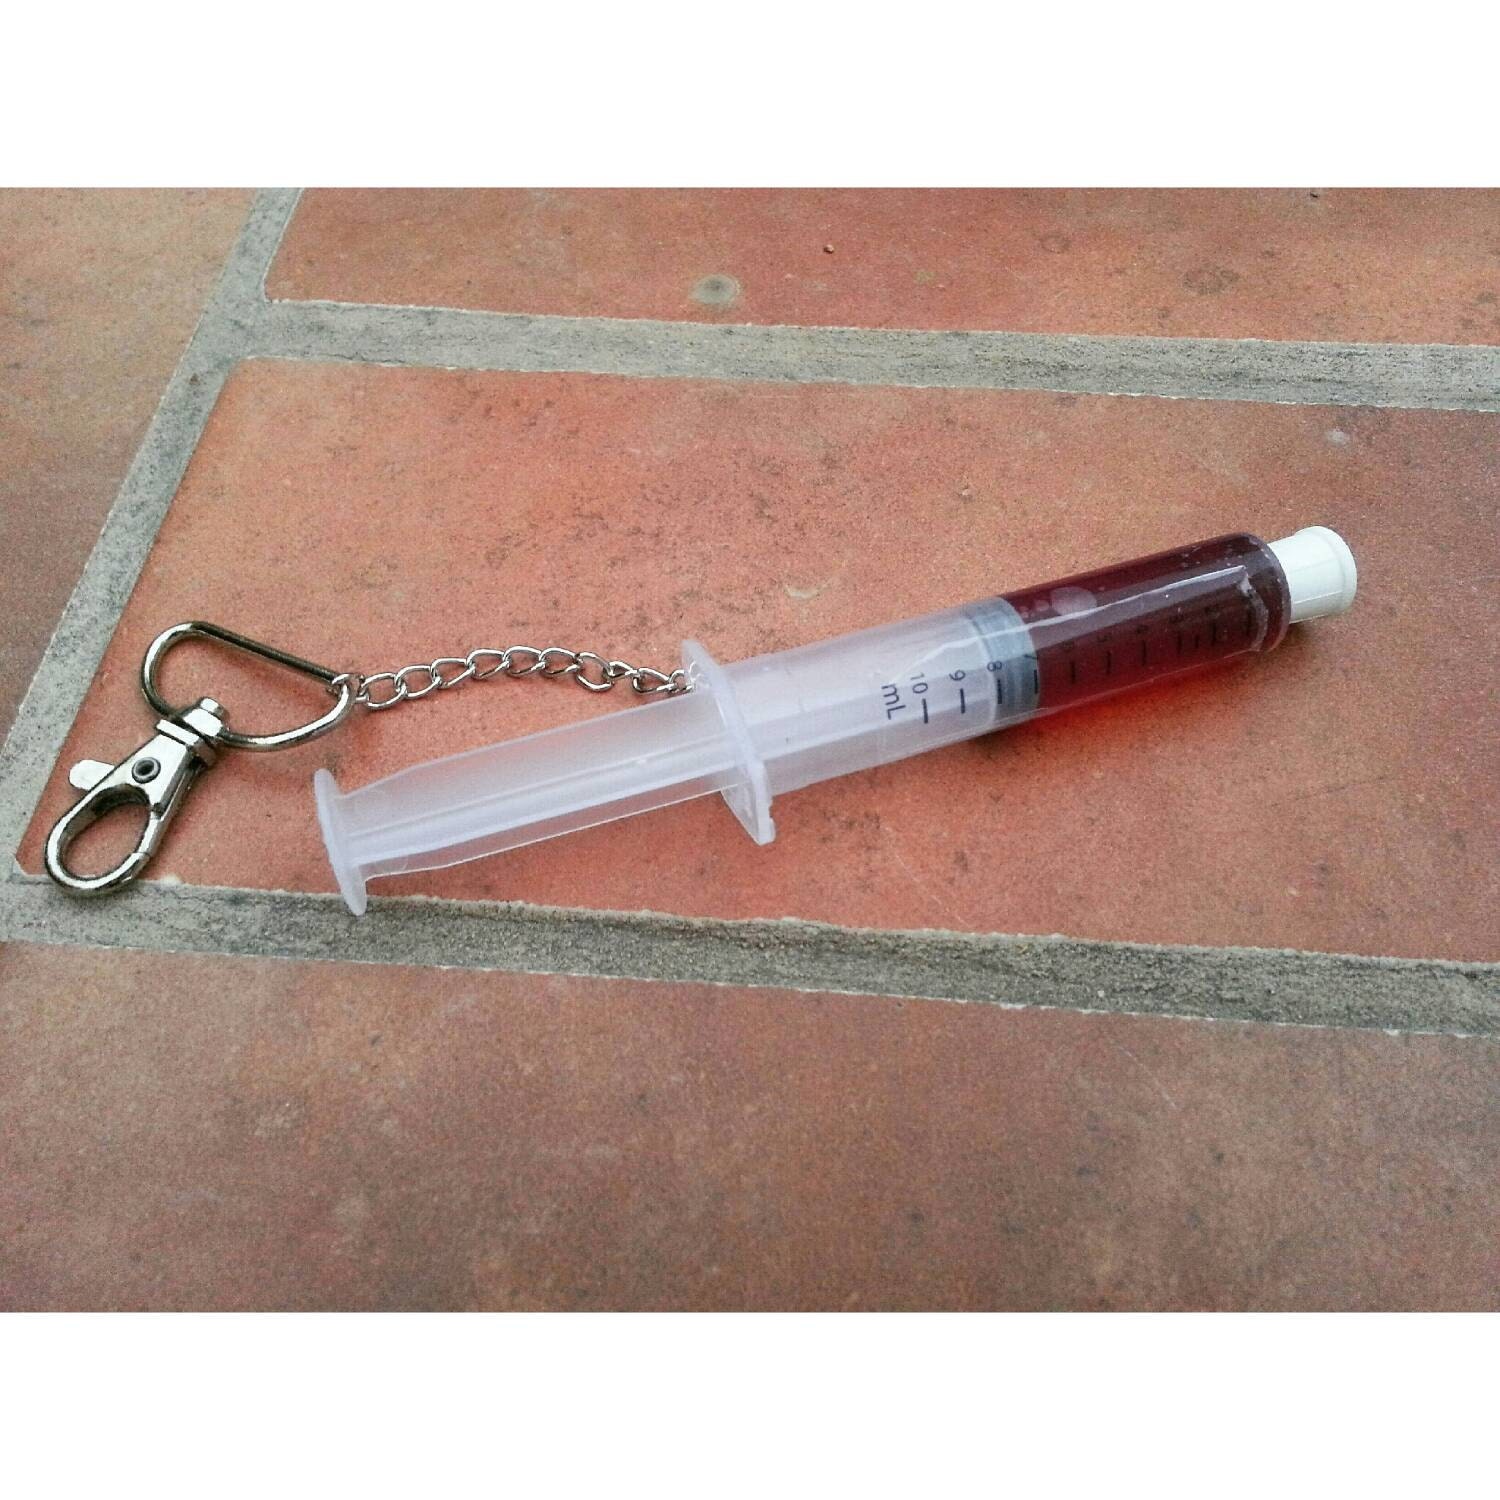 Plastic Syringe Keychain filled with Fake by GraveRaiderCreations